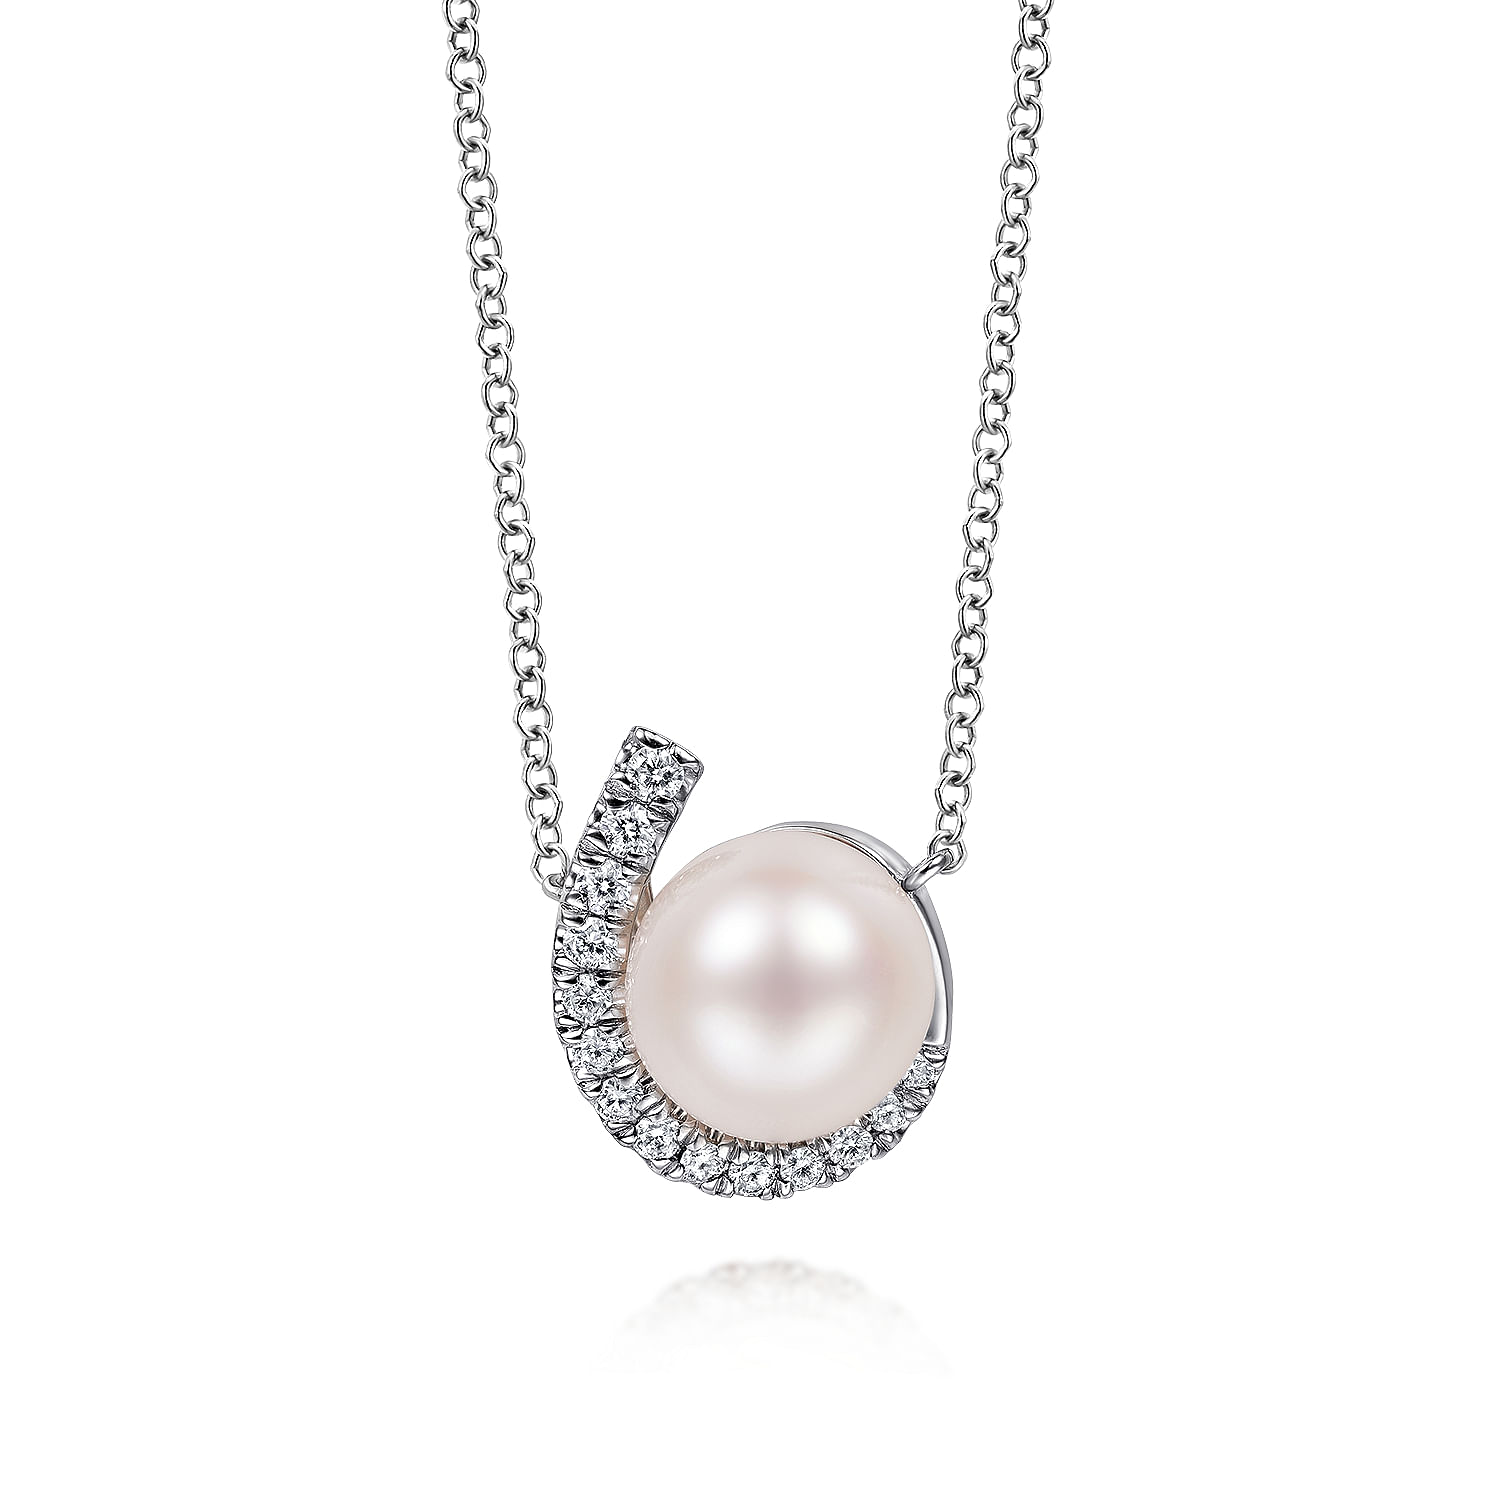 14K White Gold Round Pearl Pendant Necklace with Diamond Halo Swirl